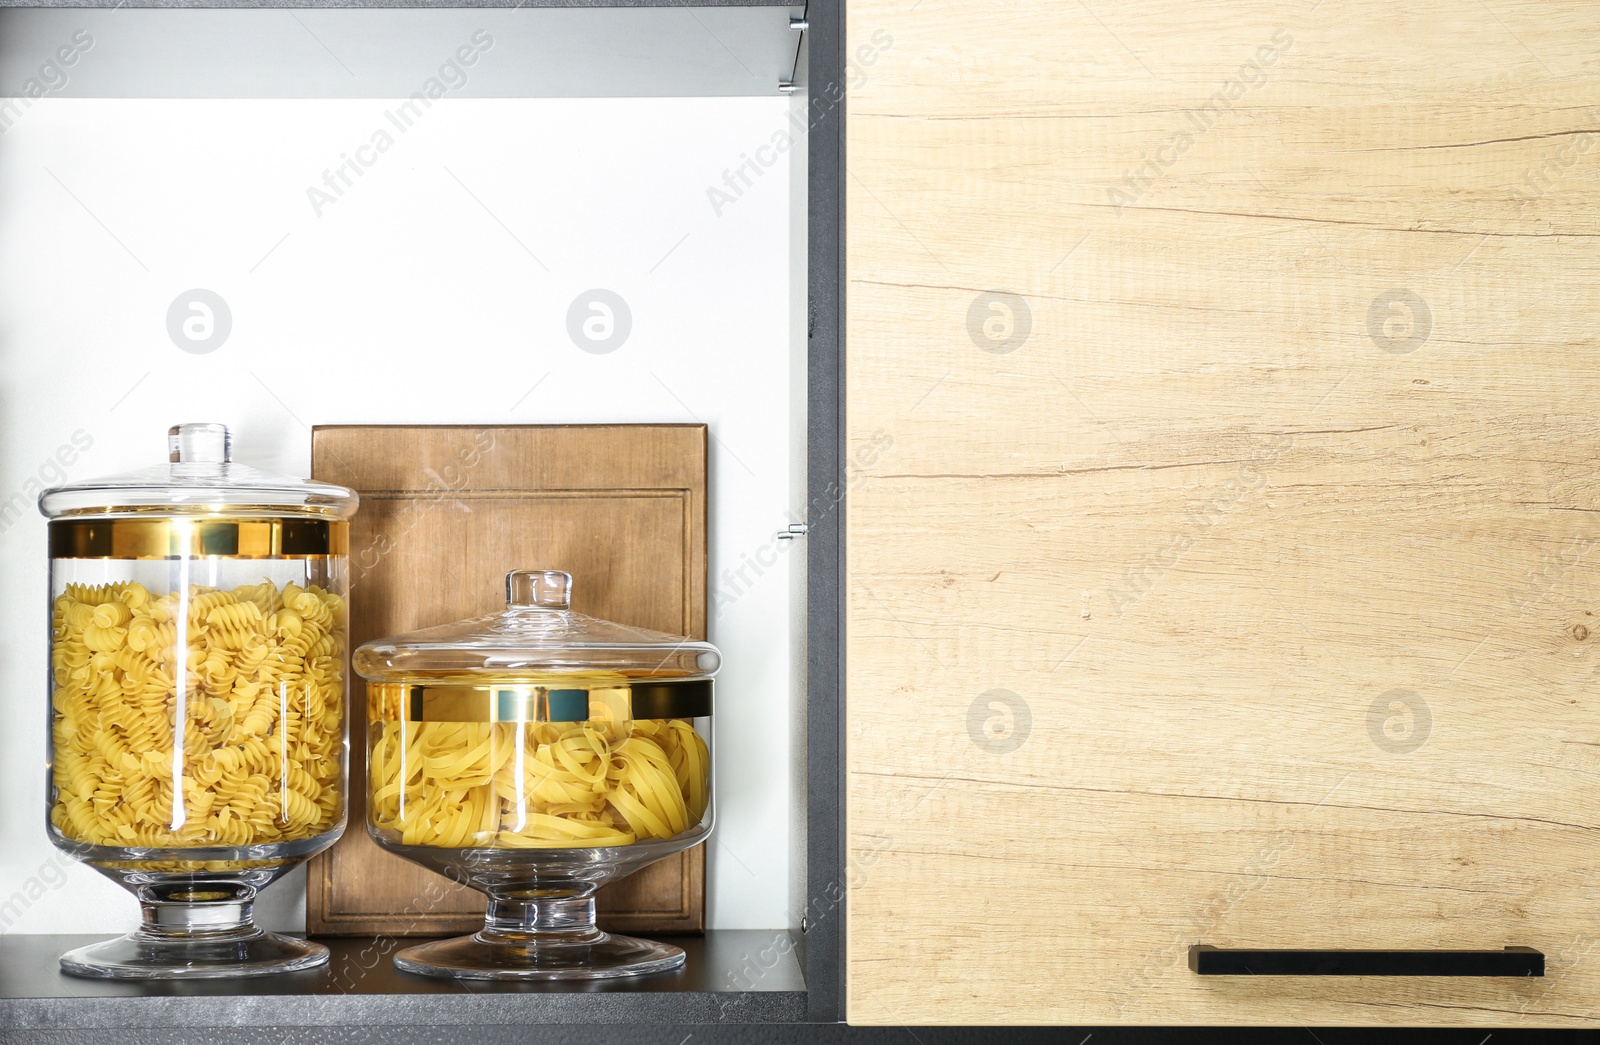 Photo of Products in modern kitchen glass containers on shelf